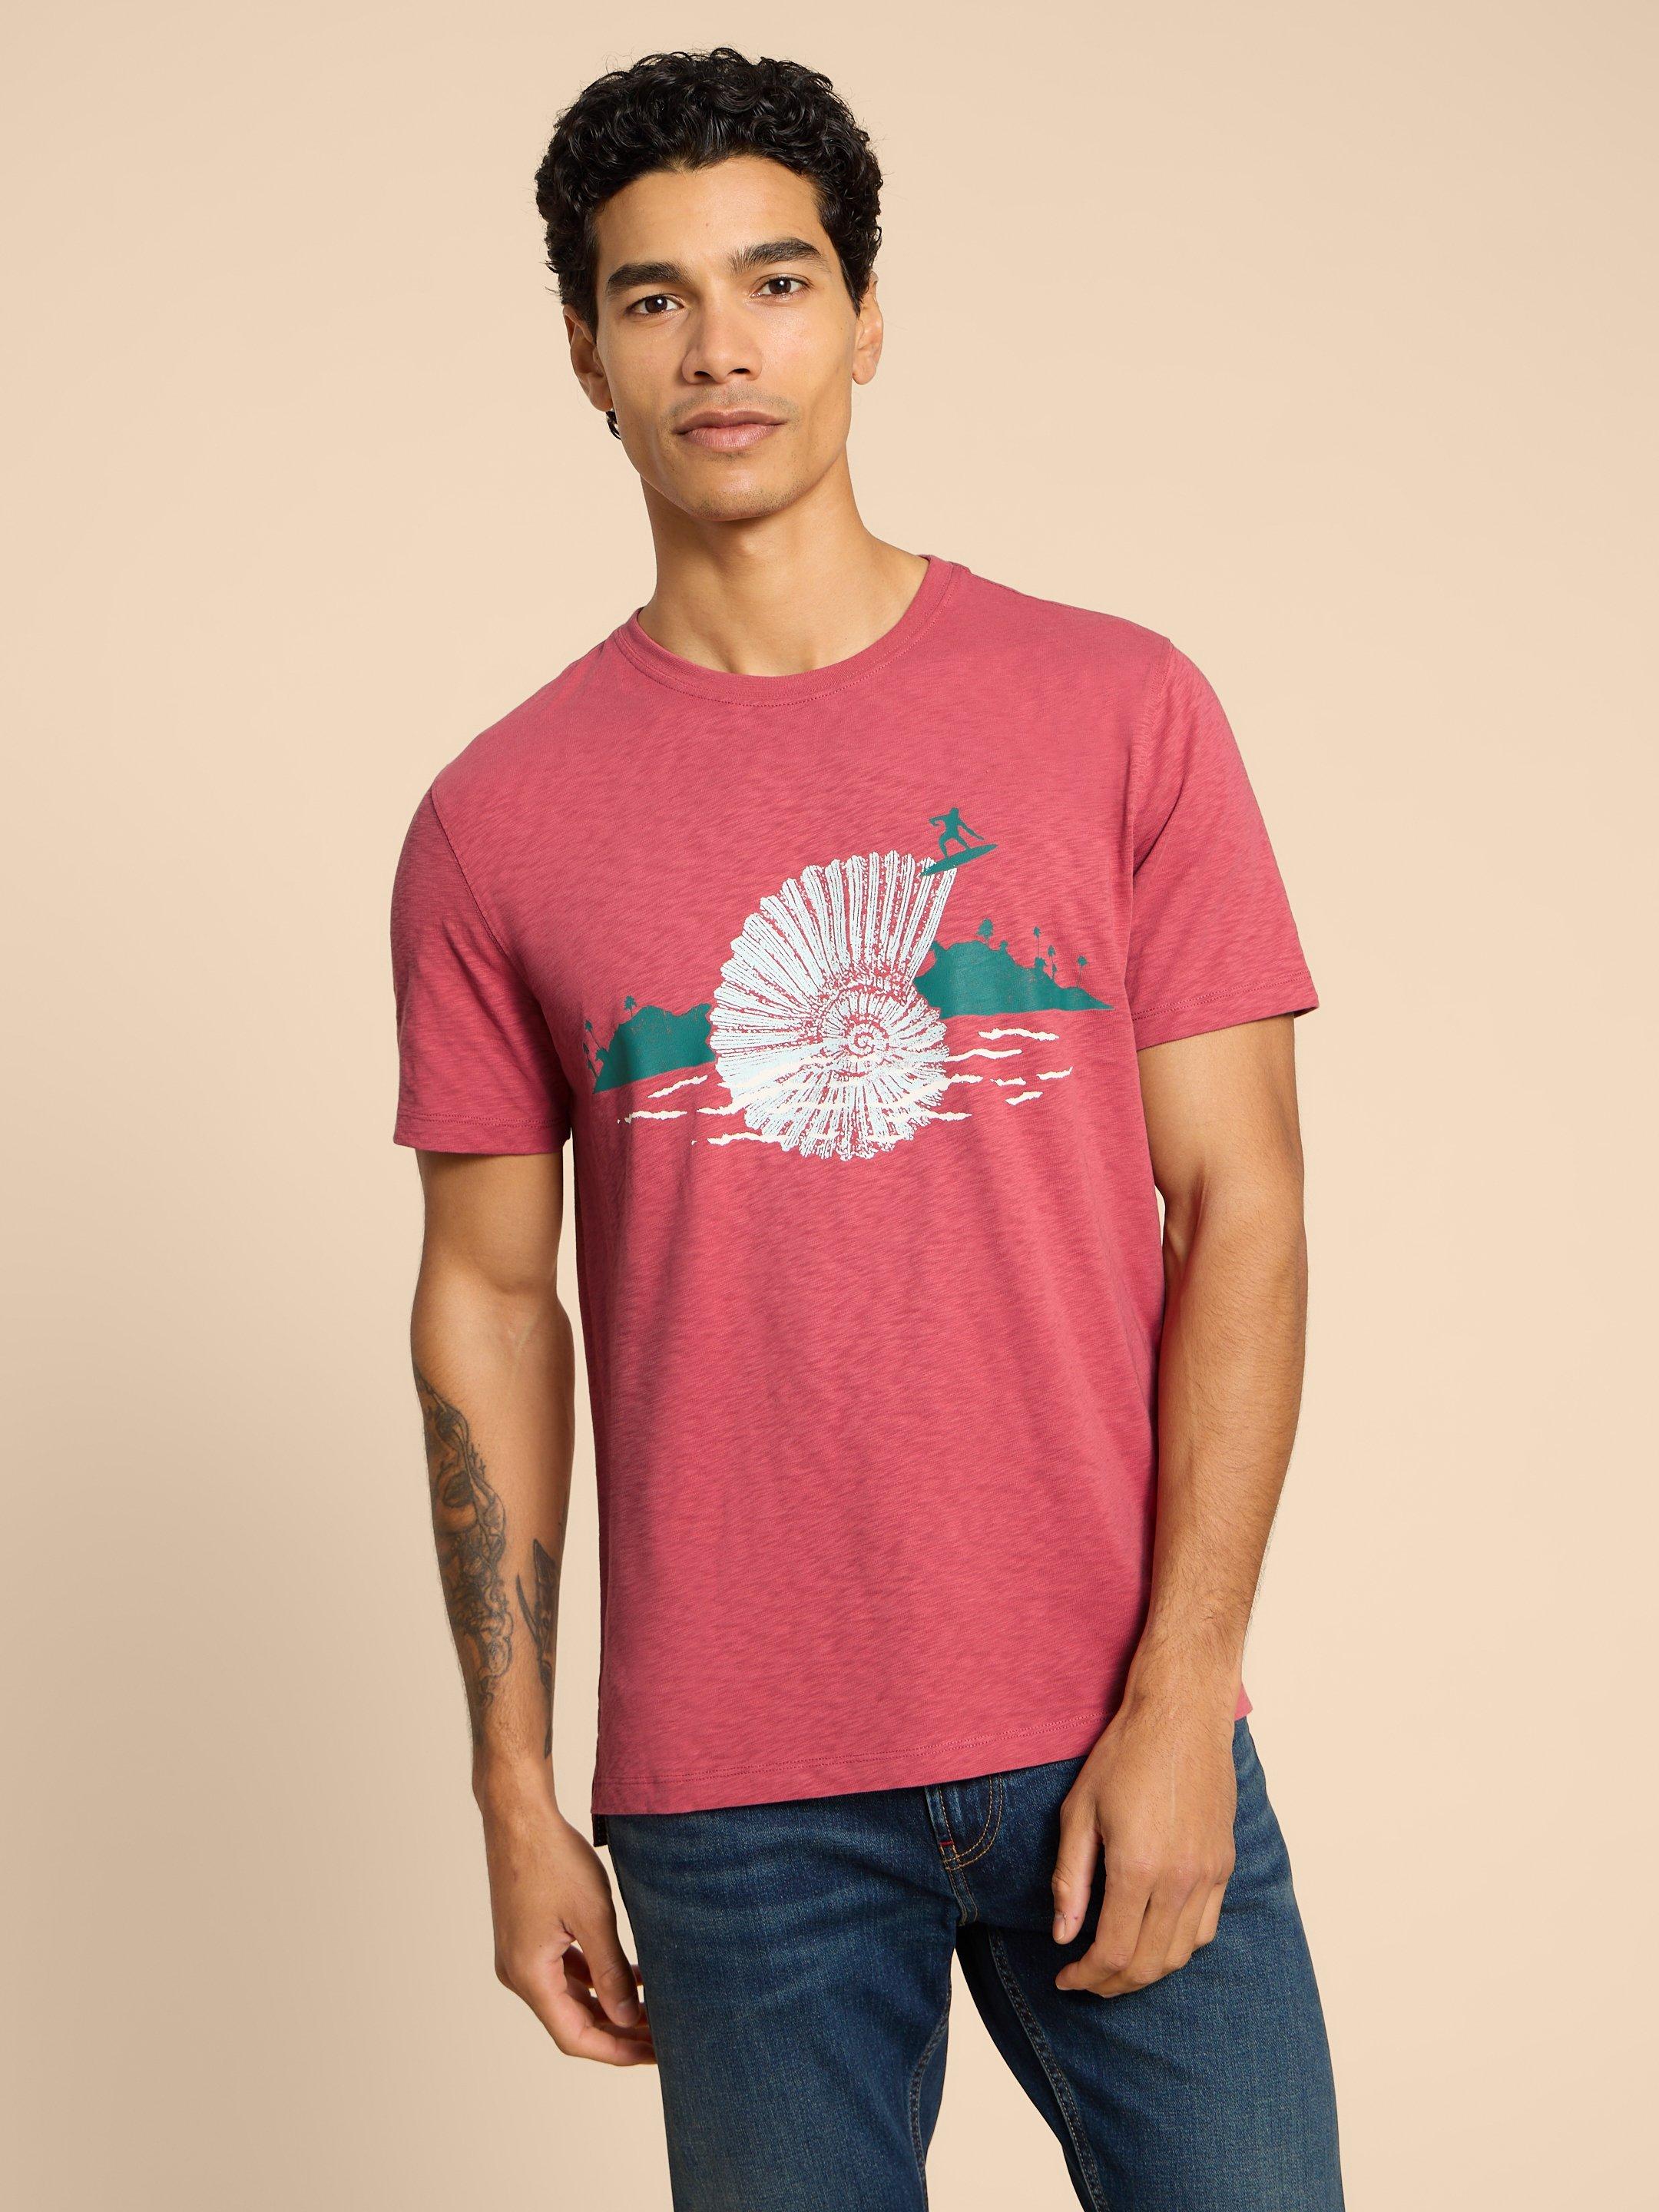 Surf Shell Graphic Tee in CORAL PR - LIFESTYLE